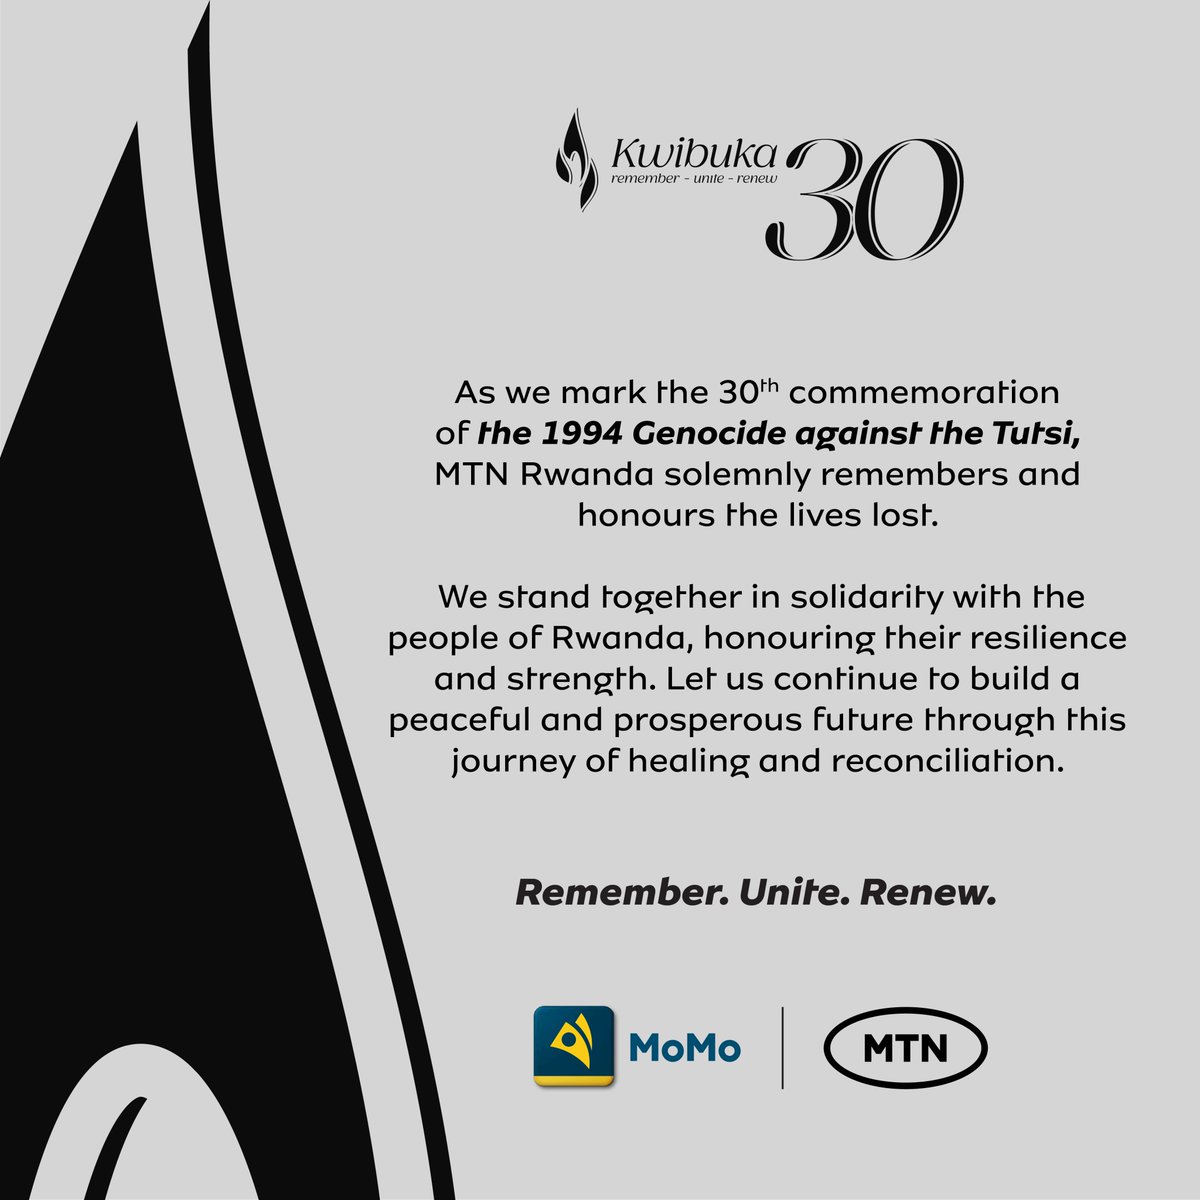 As the commemoration week begins, MTN Rwanda joins Rwandans and the rest of the world to remember and pay tribute to the victims of the 1994 Genocide against the Tutsi. We honor the survivors during this mourning period. #Kwibuka30 #KwibukaTwiyubaka 🇷🇼